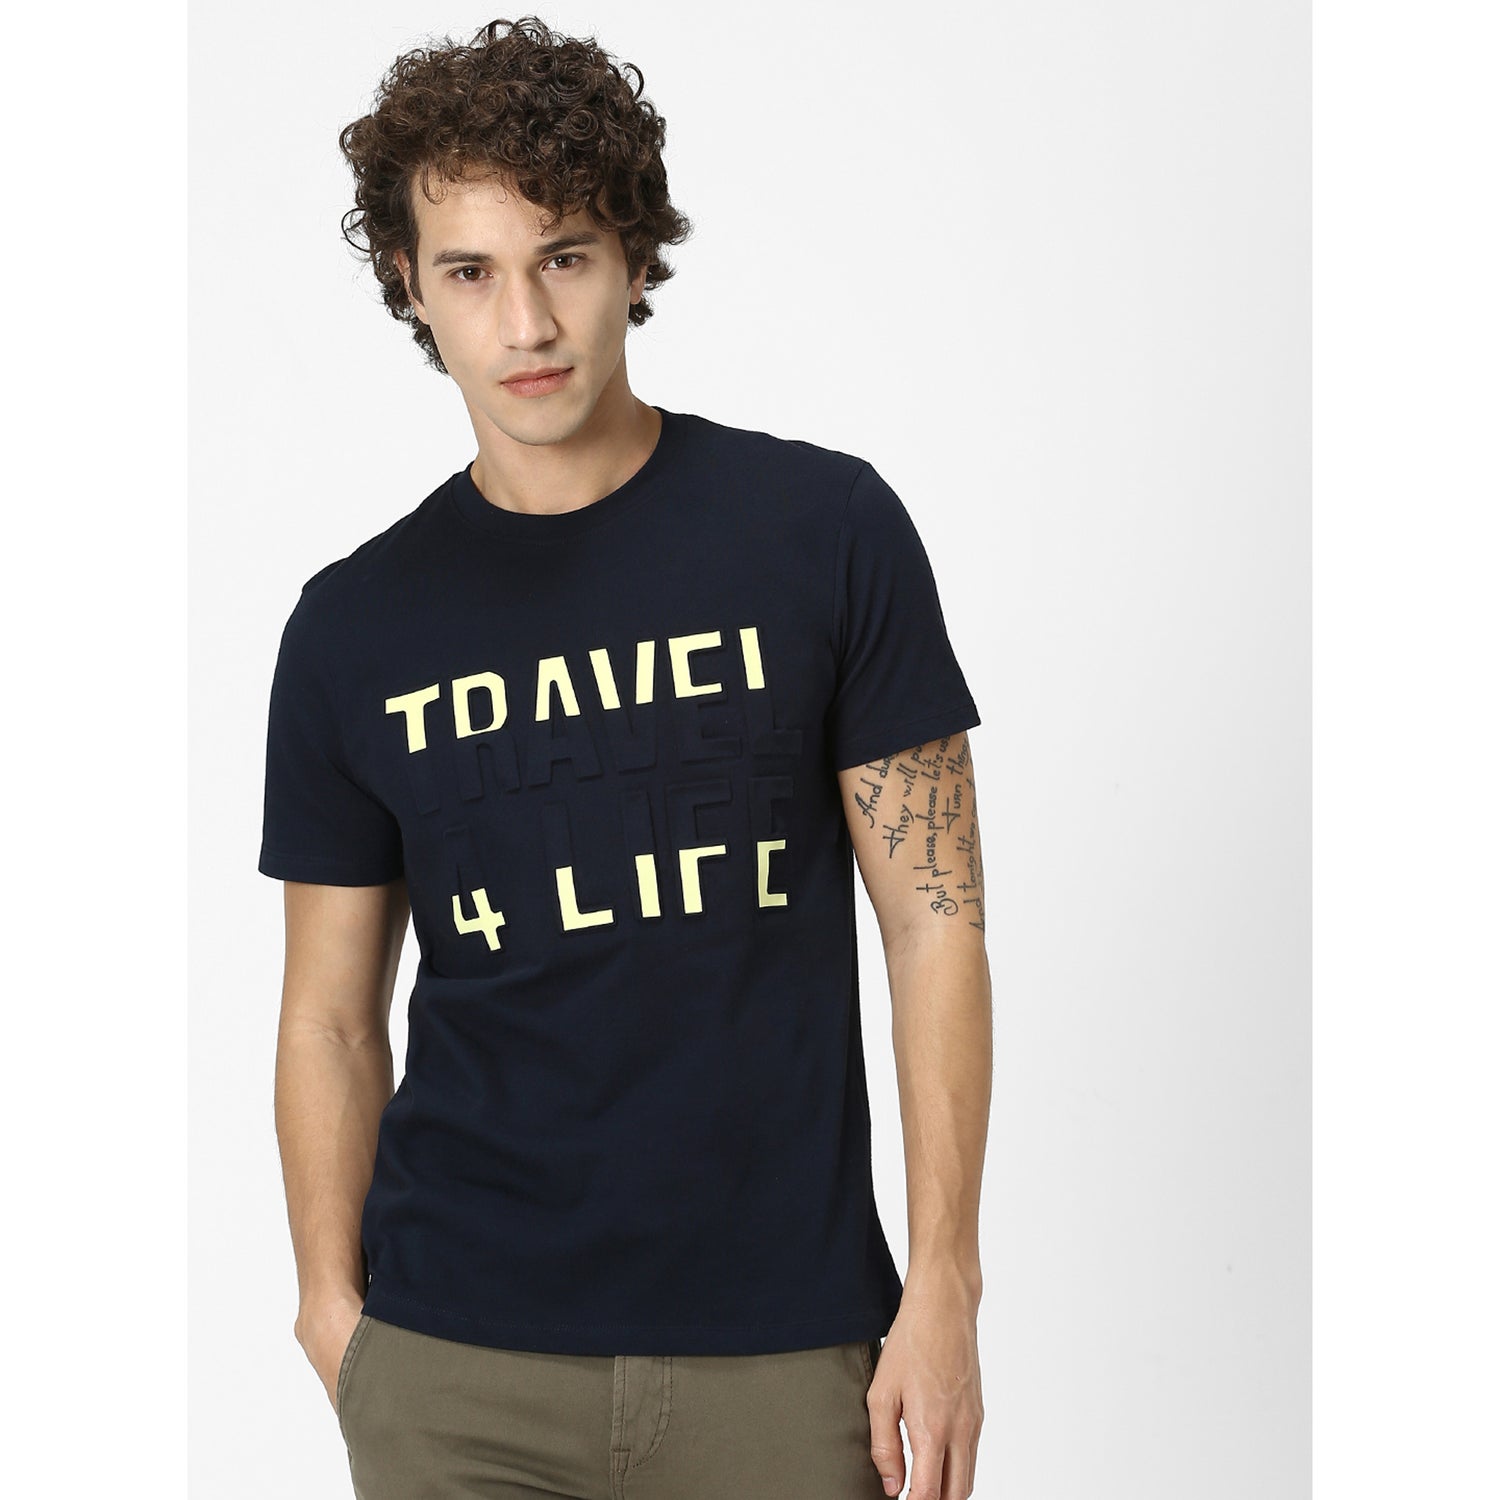 Navy Blue and Yellow Printed Round Neck Pure Cotton T-shirt (RETRAVEL)